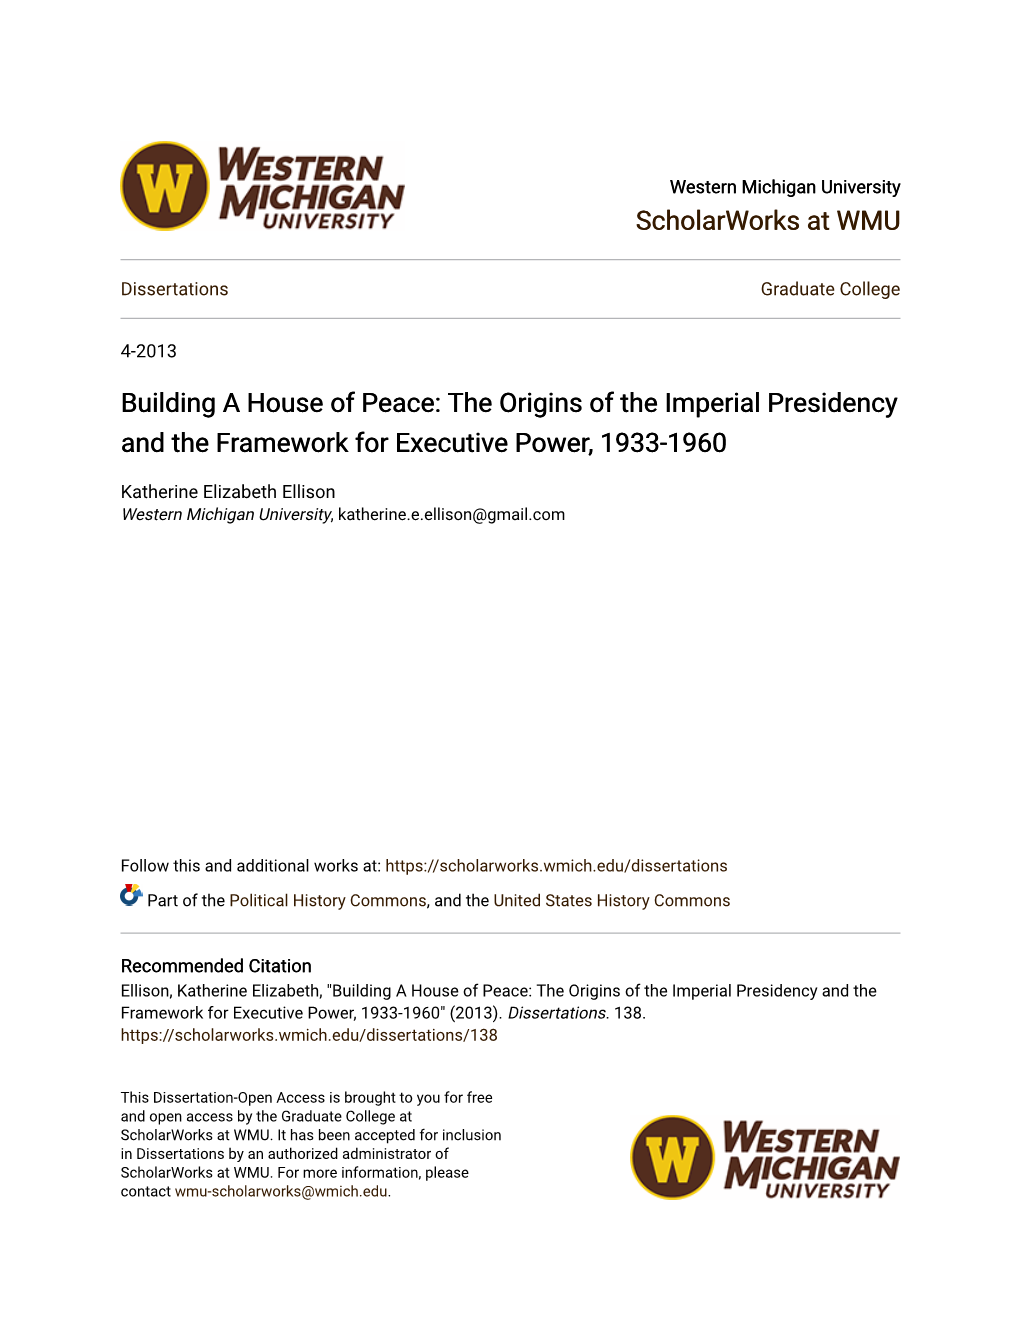 The Origins of the Imperial Presidency and the Framework for Executive Power, 1933-1960